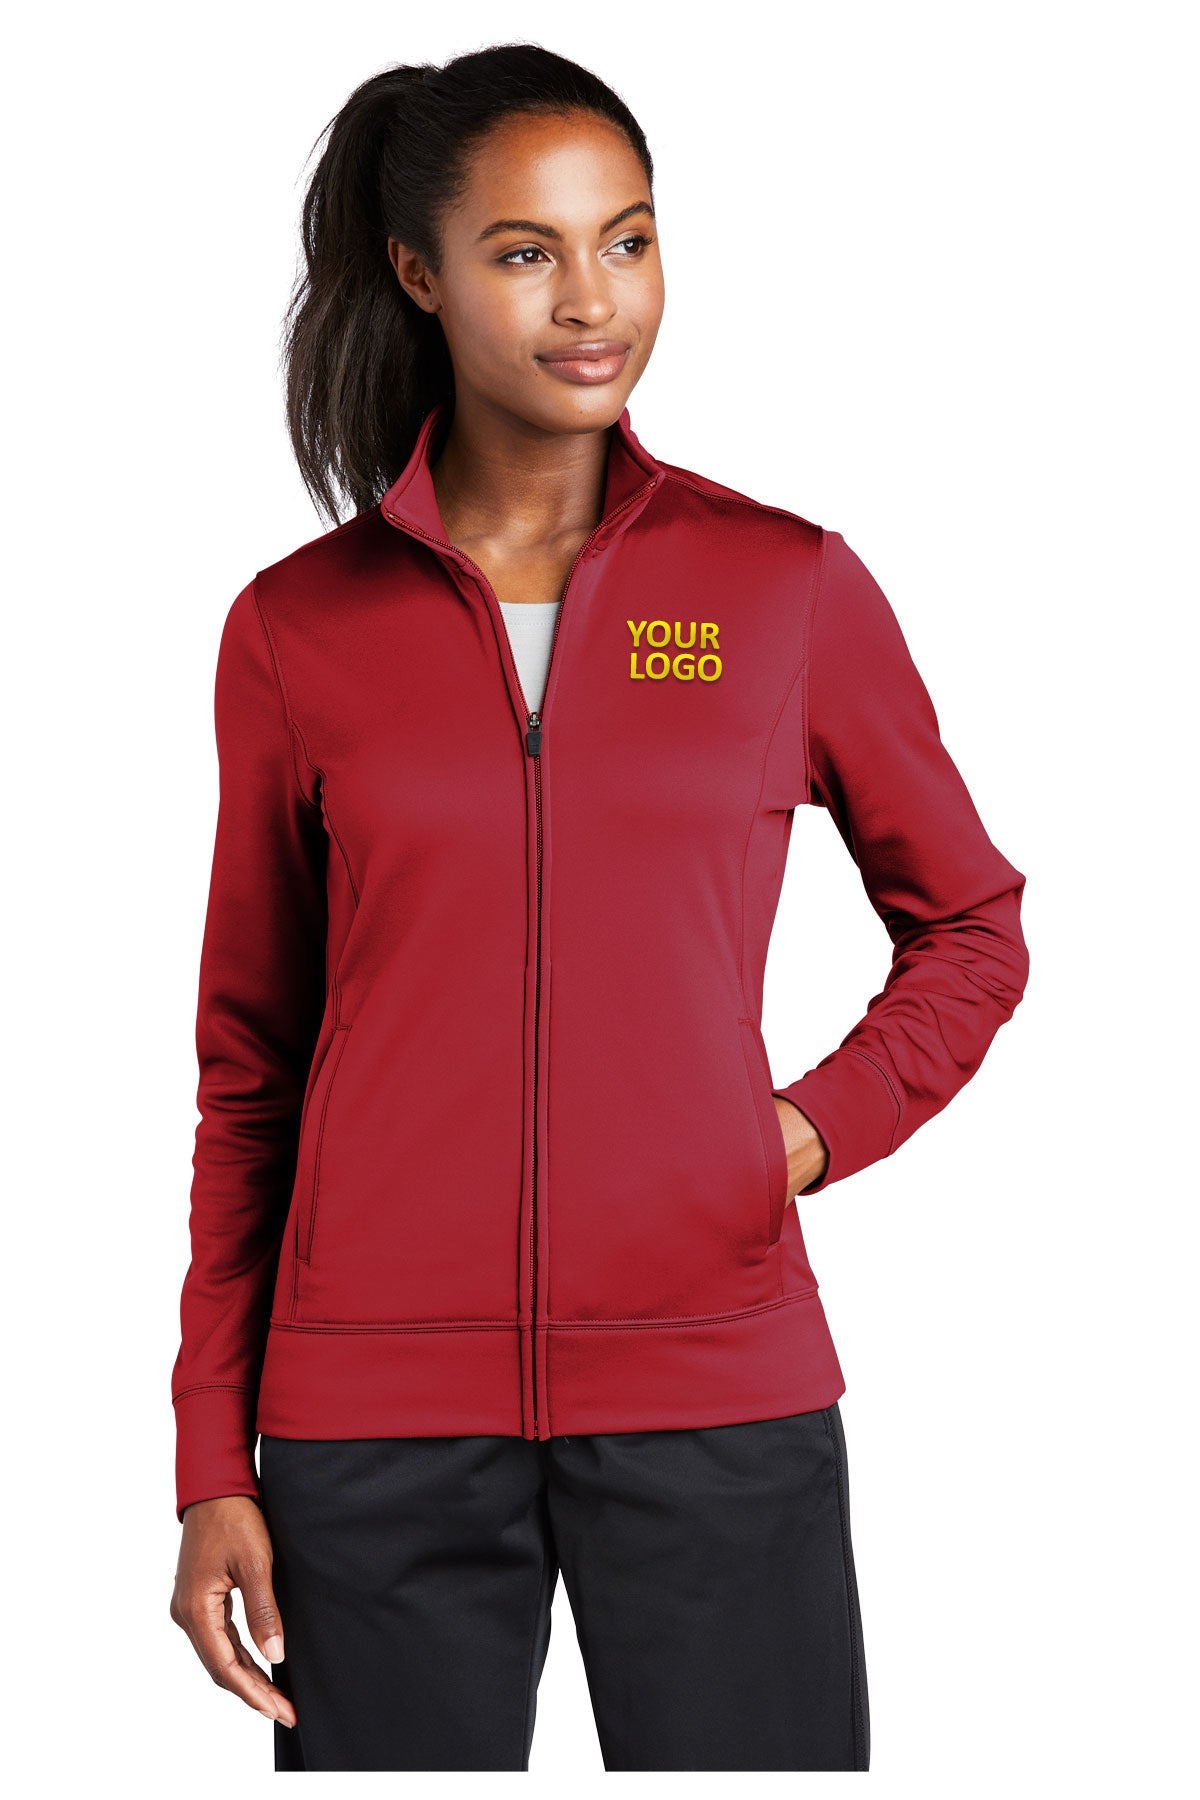 Sport-Tek Deep Red LST241 company jackets with logo